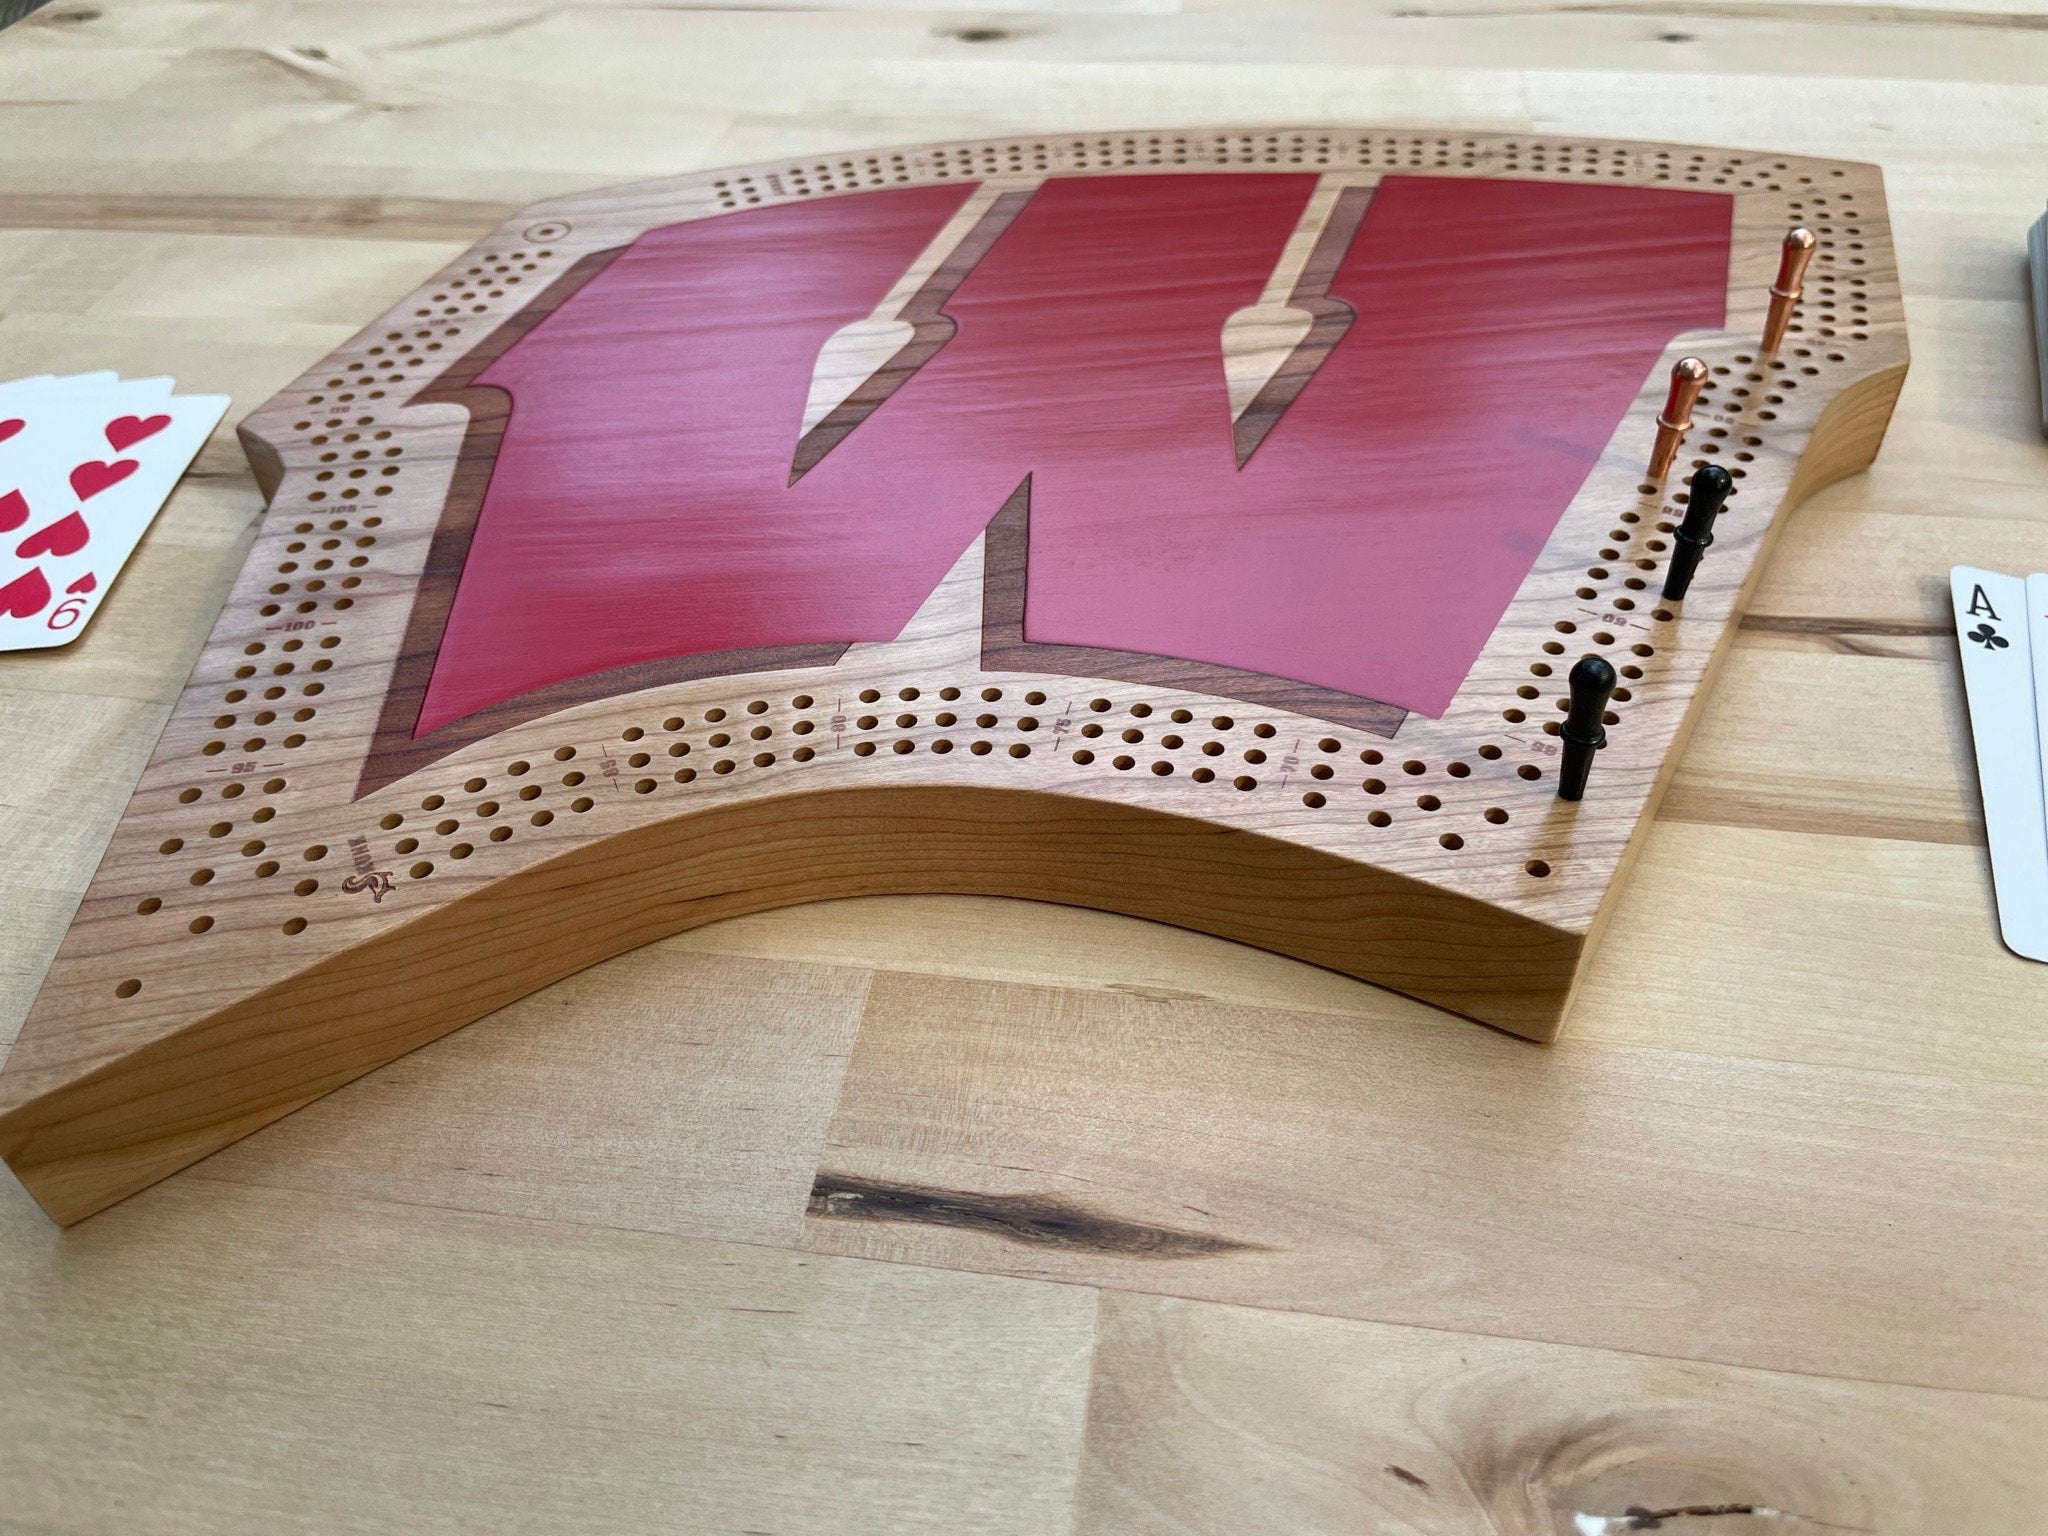 University of Wisconsin "Motion W" Cribbage Board & Wall Display